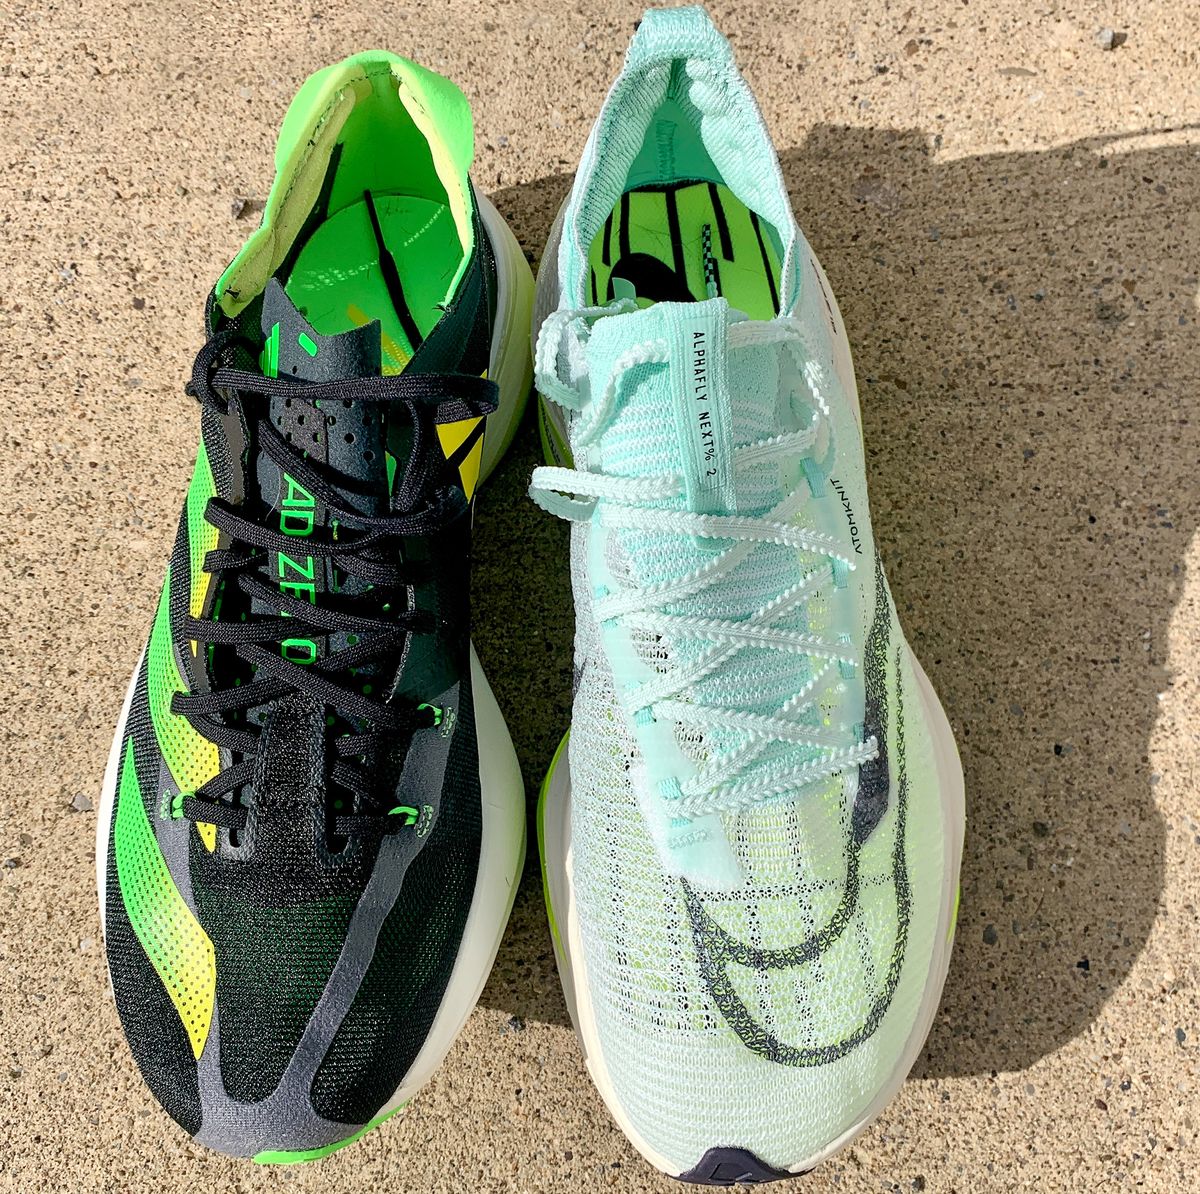 Nike Vs. Which Marathon Shoe Leads the Pack?